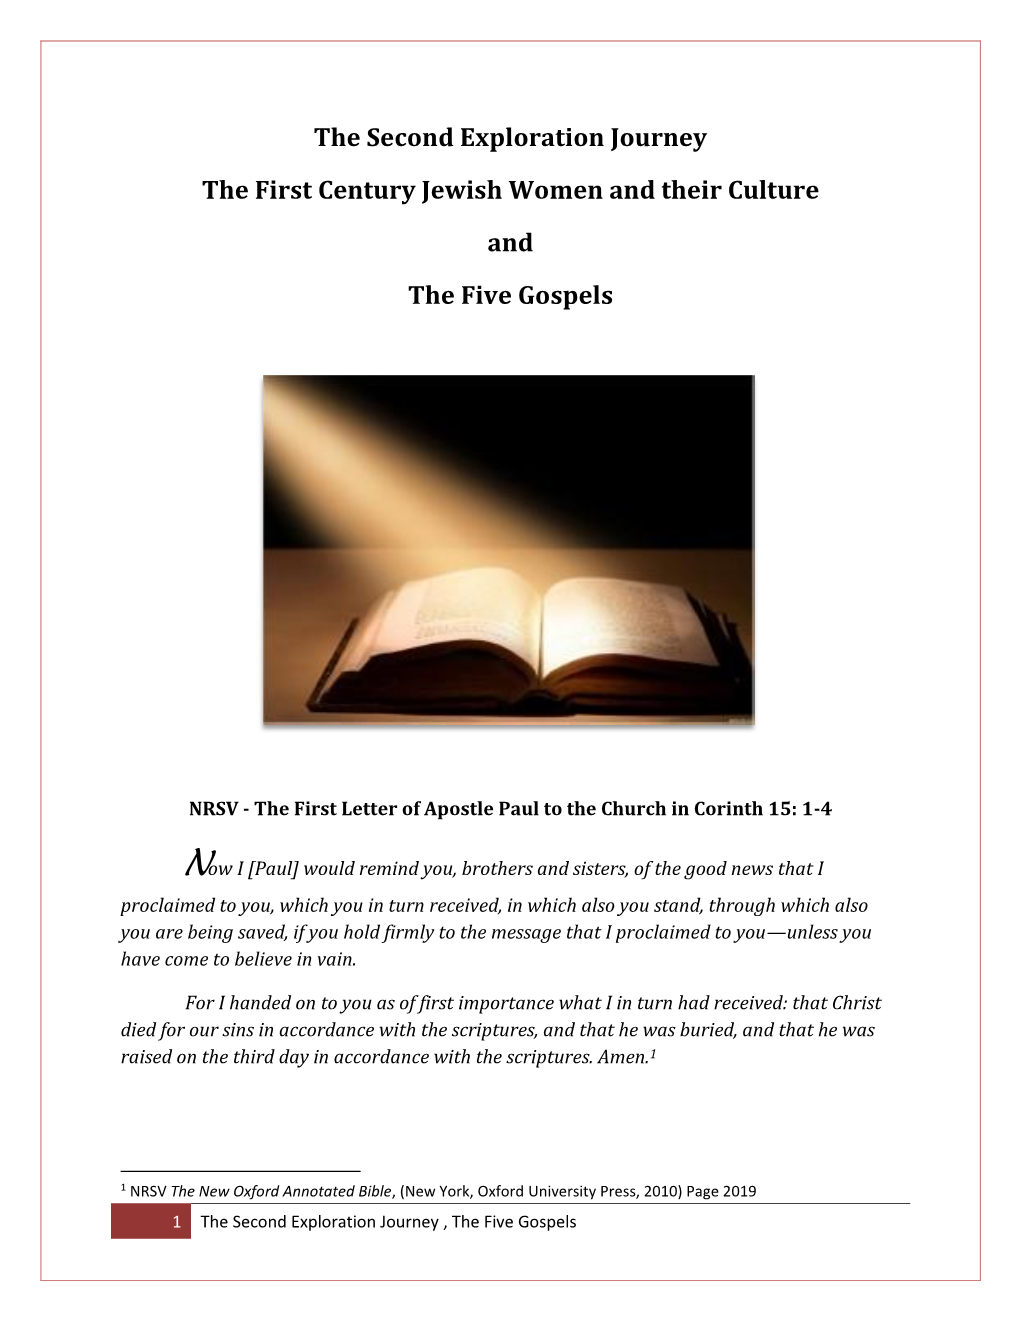 The Second Exploration Journey the First Century Jewish Women and Their Culture and the Five Gospels